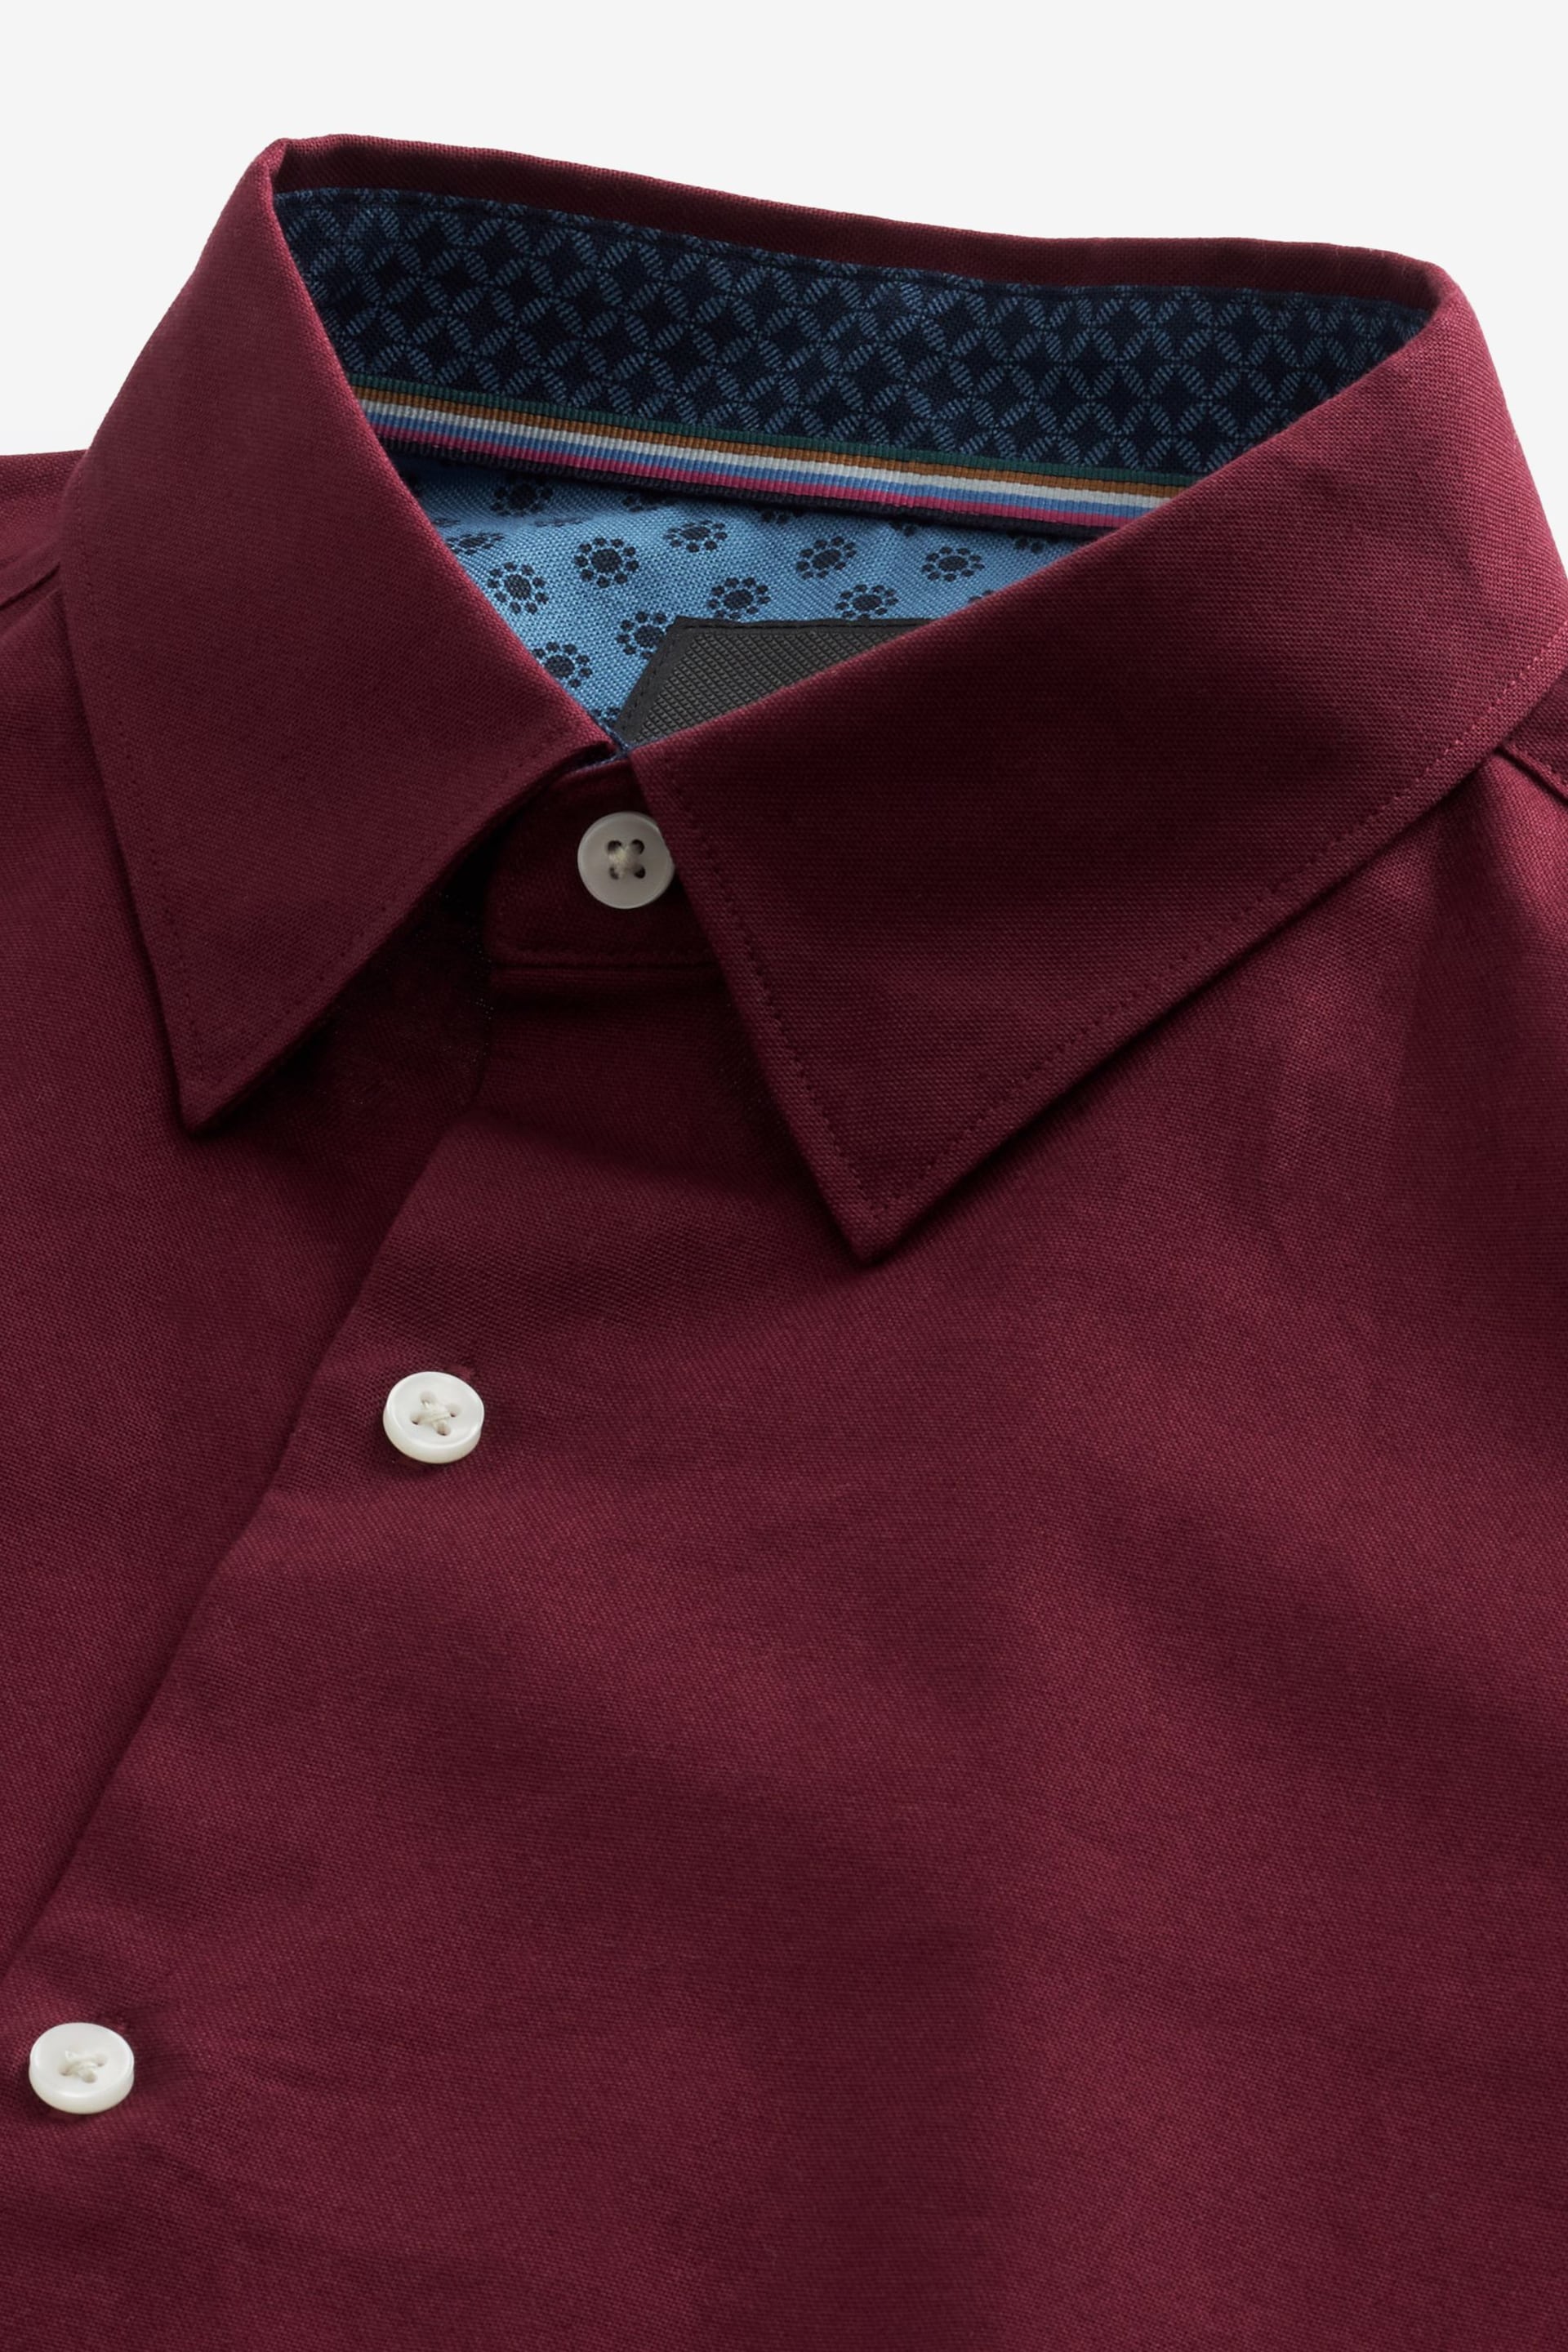 Berry Red Stretch Oxford Long Sleeve Shirt - Image 4 of 5